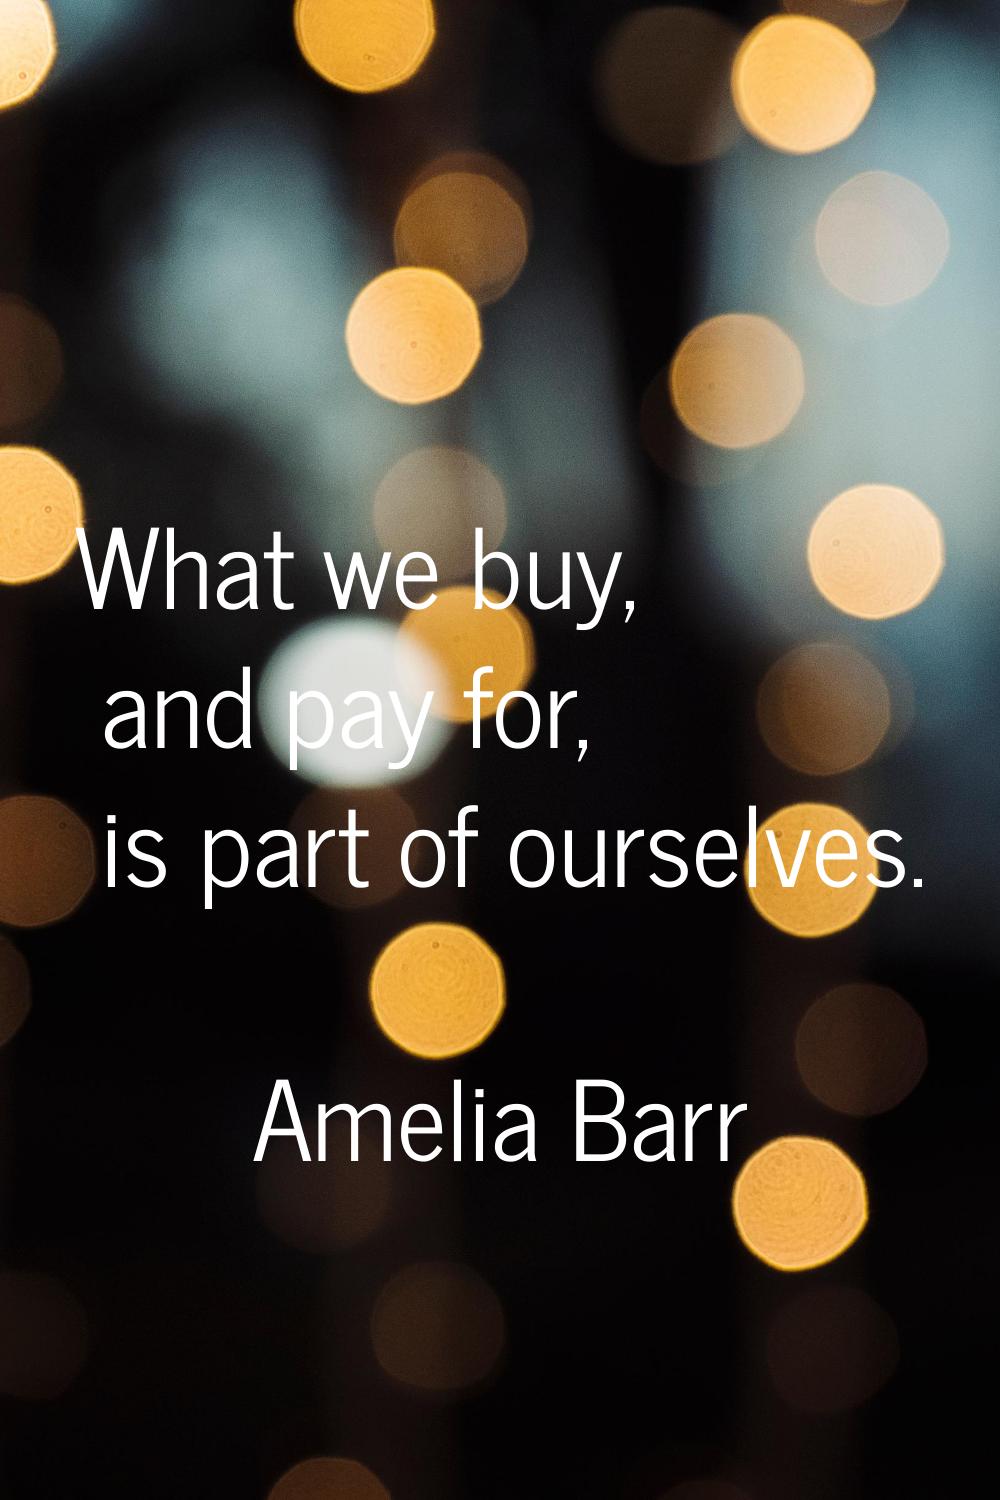 What we buy, and pay for, is part of ourselves.